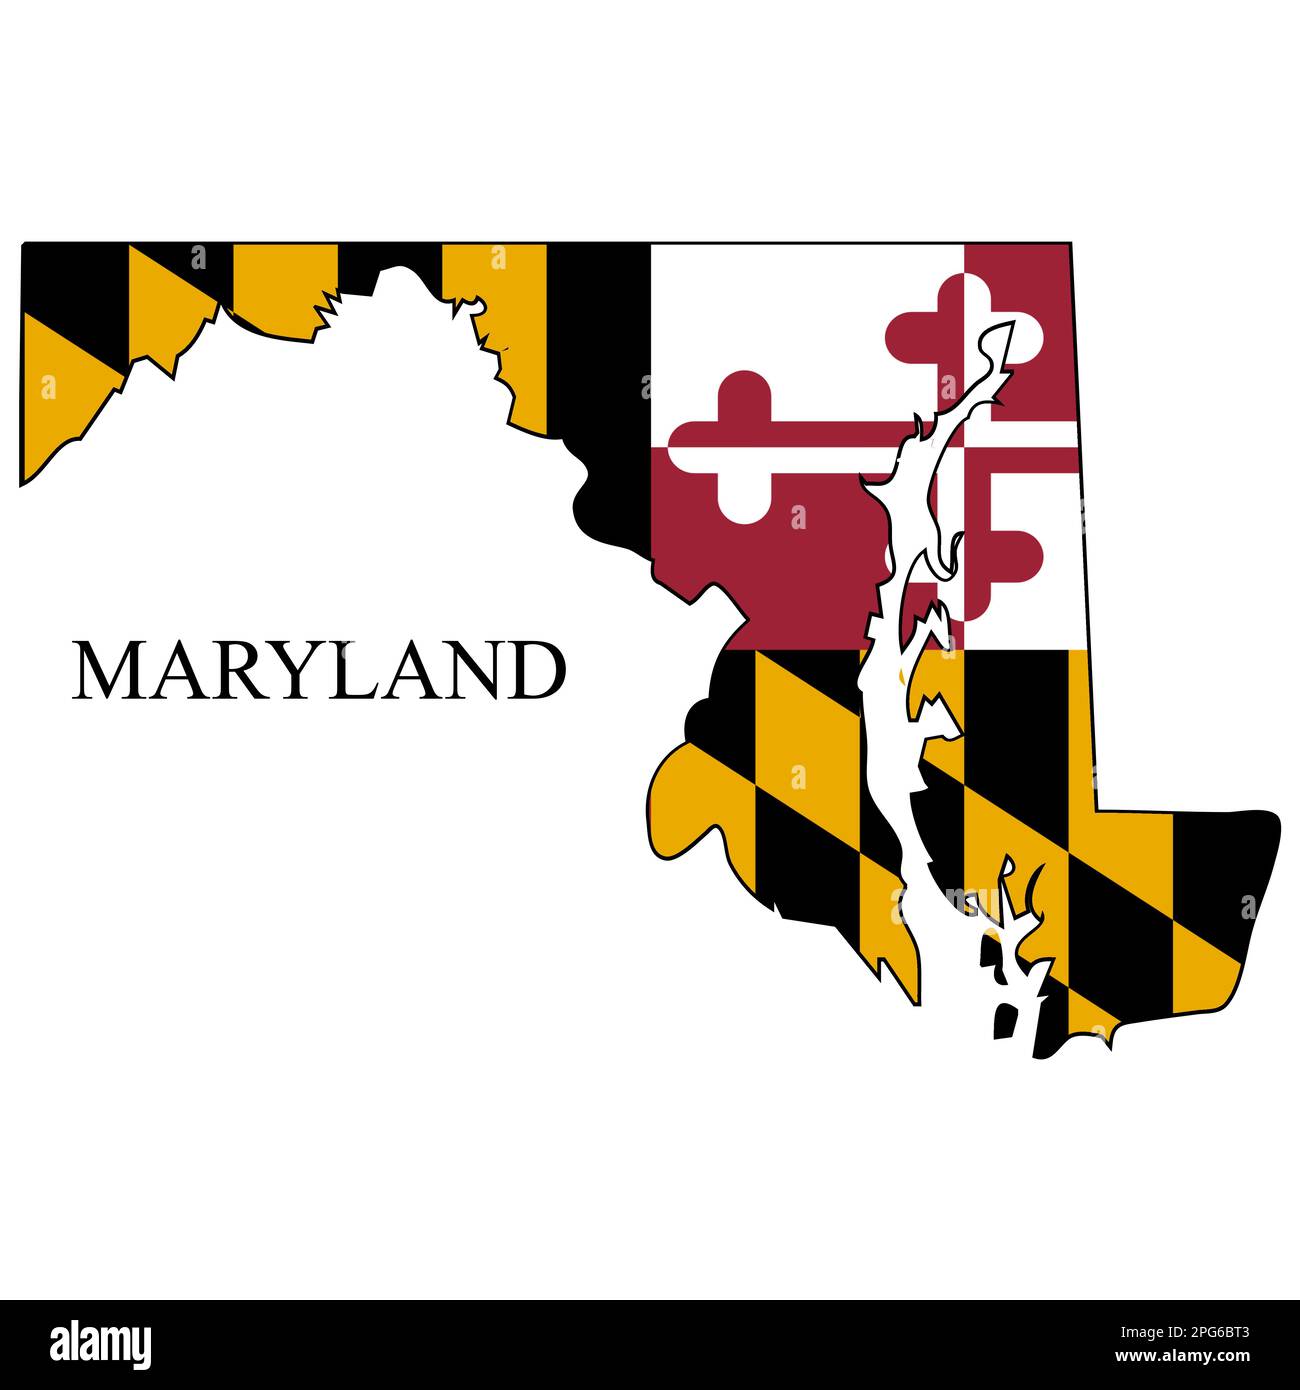 Maryland map vector illustration. Global economy. State in America. North America. United States. America. U.S.A Stock Vector